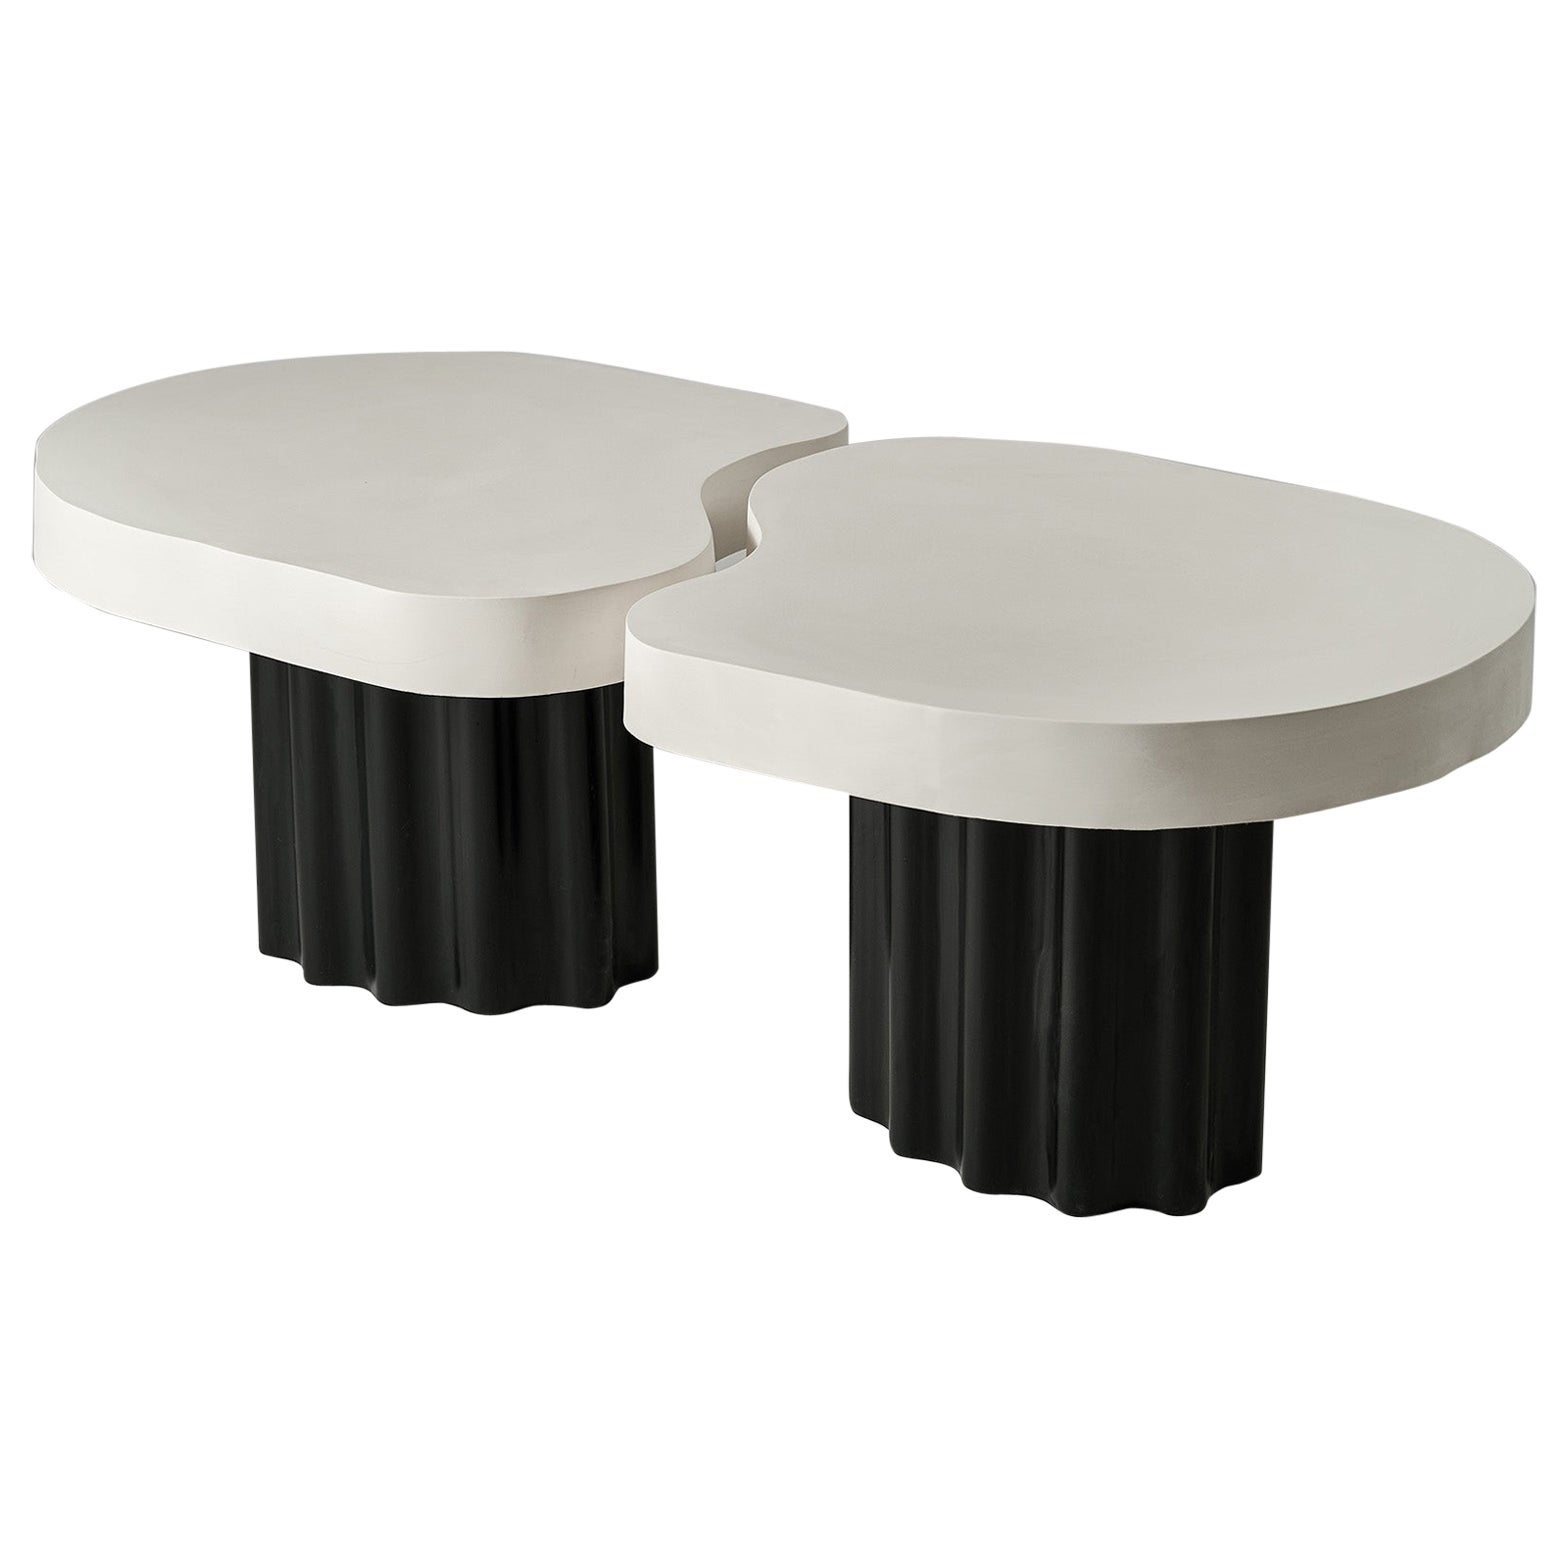 Set of 2 Organic Edge No. 2 Coffee Tables by Perler  For Sale